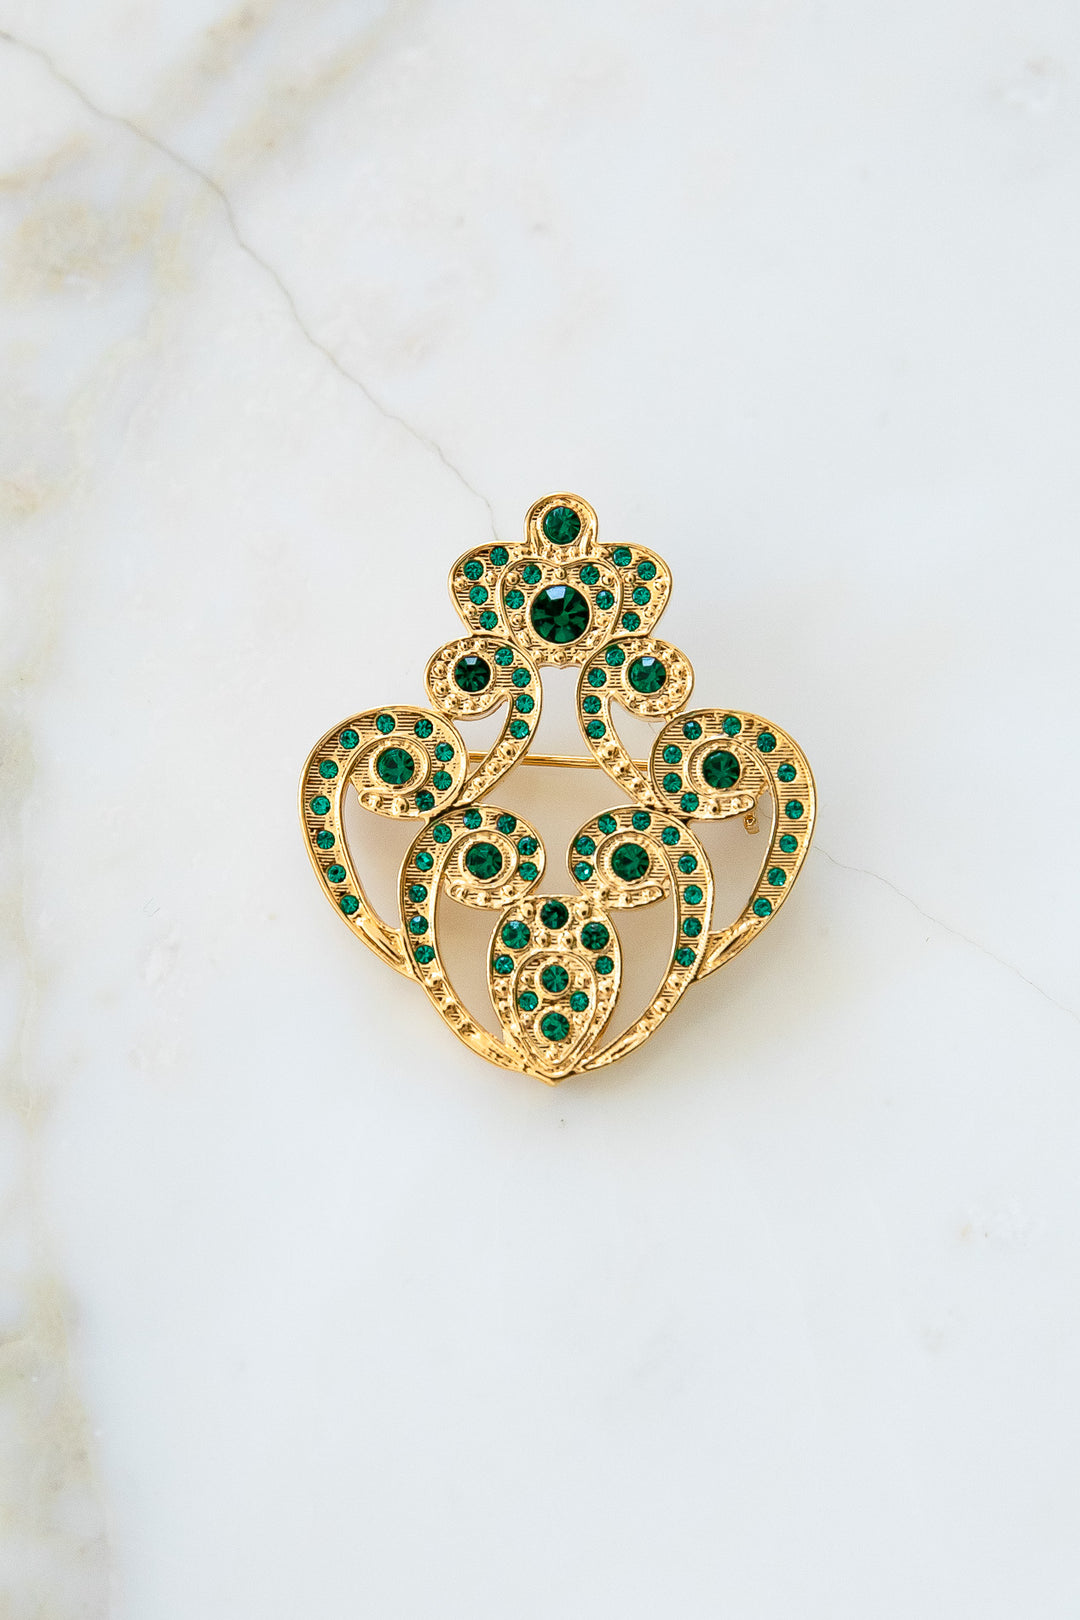 The Crown Brooch - Gold With Emerald Crystals